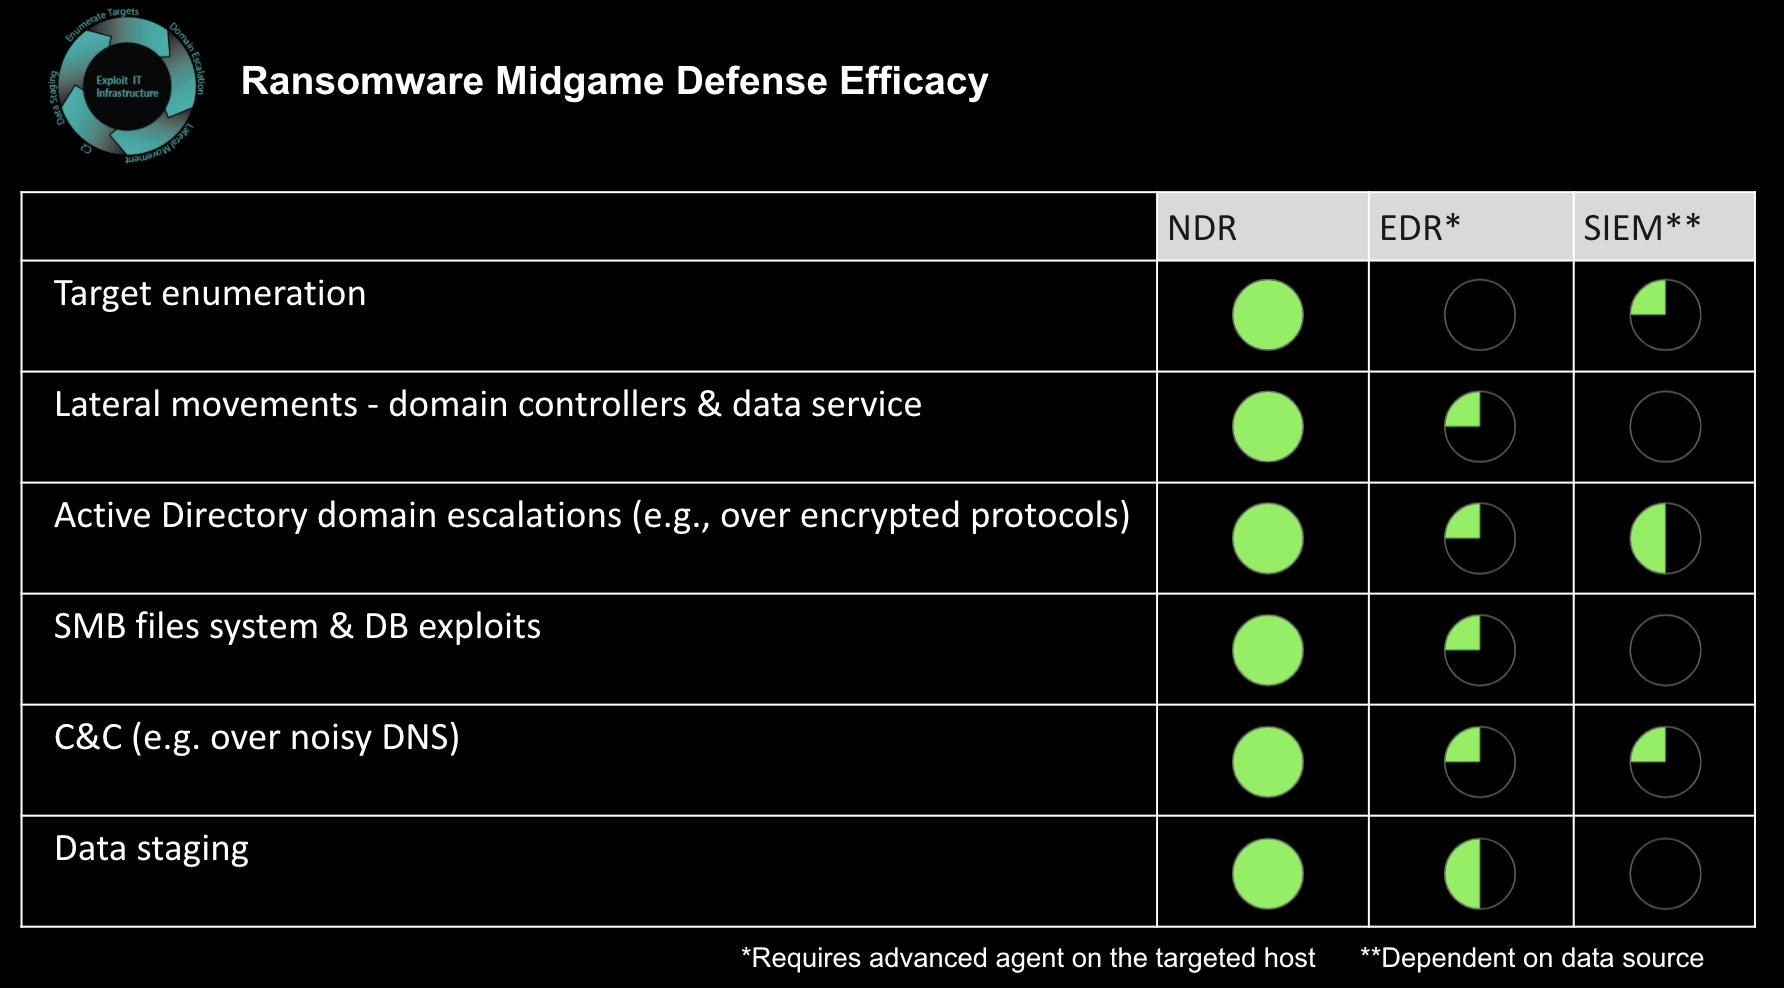 The Efficacy of Midgame Defense for Ransomware